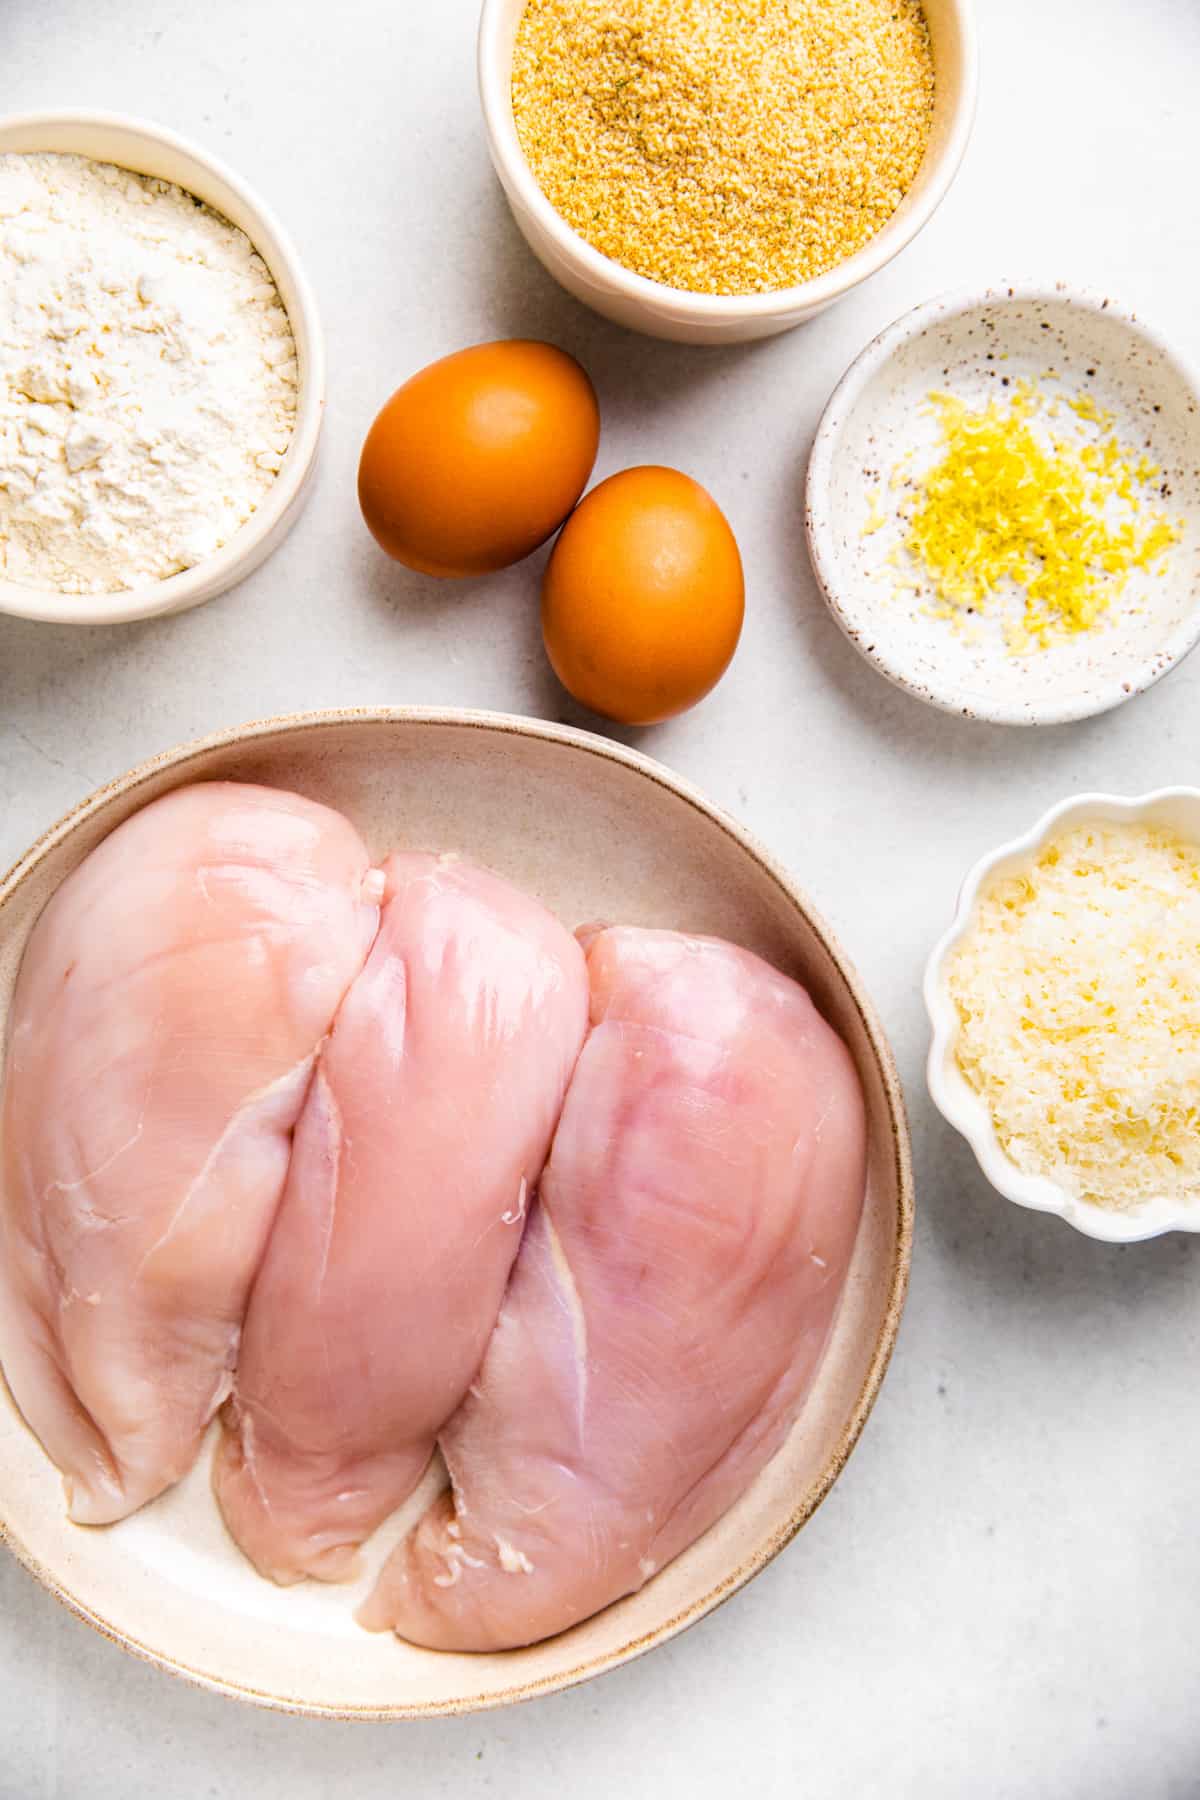 Ingredients for Baked Chicken Cutlets.